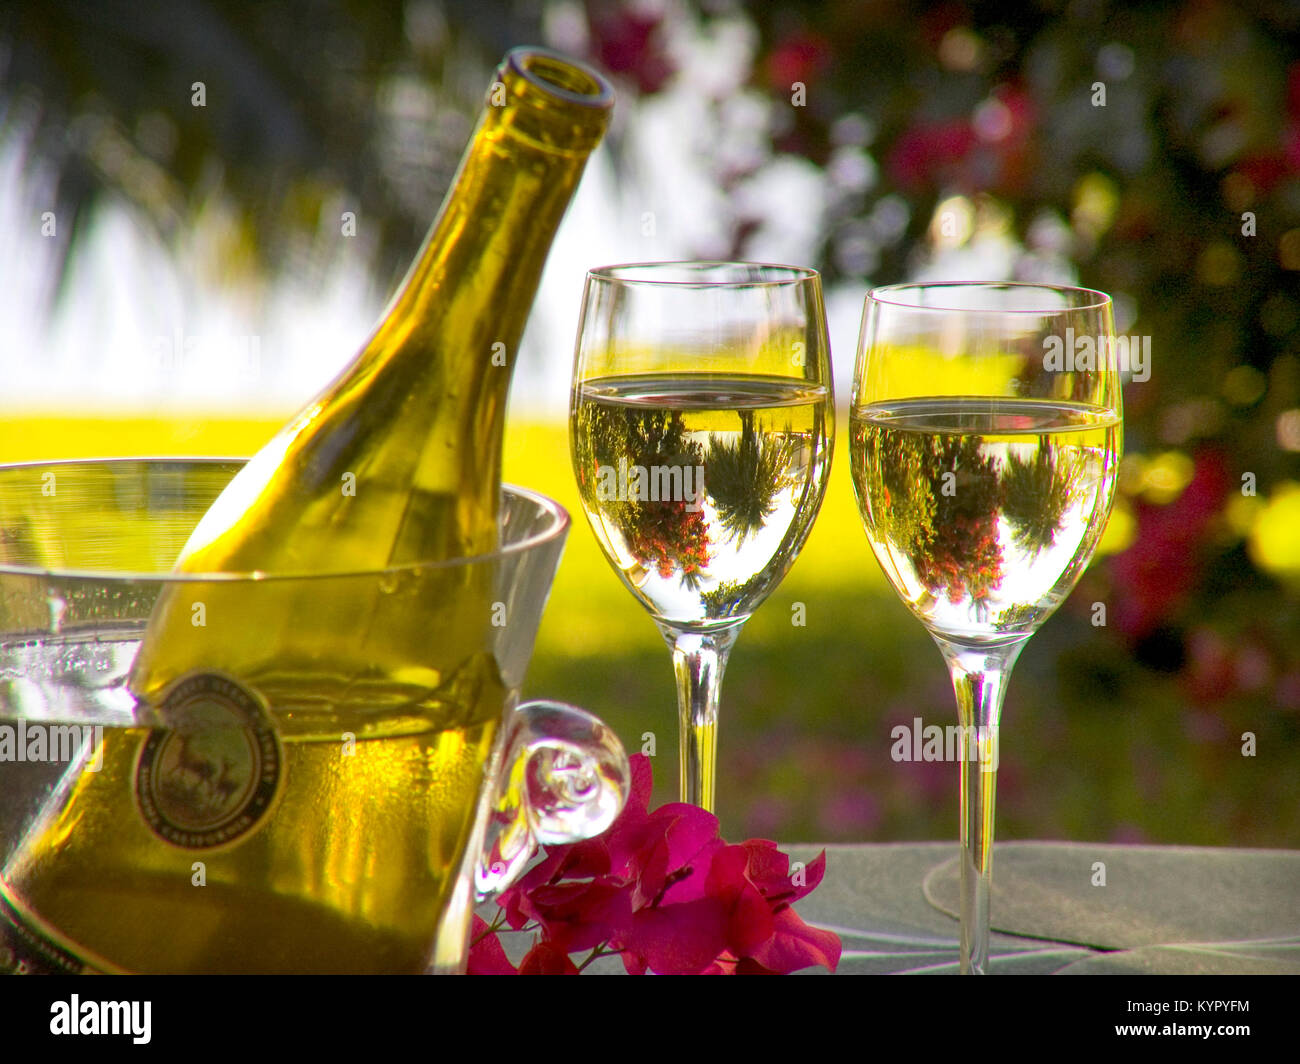 Two freshly poured glasses of chilled white wine on alfresco garden terrace table with bougainvillea flowers and palm trees behind in sunny luxury vacation holiday setting Stock Photo